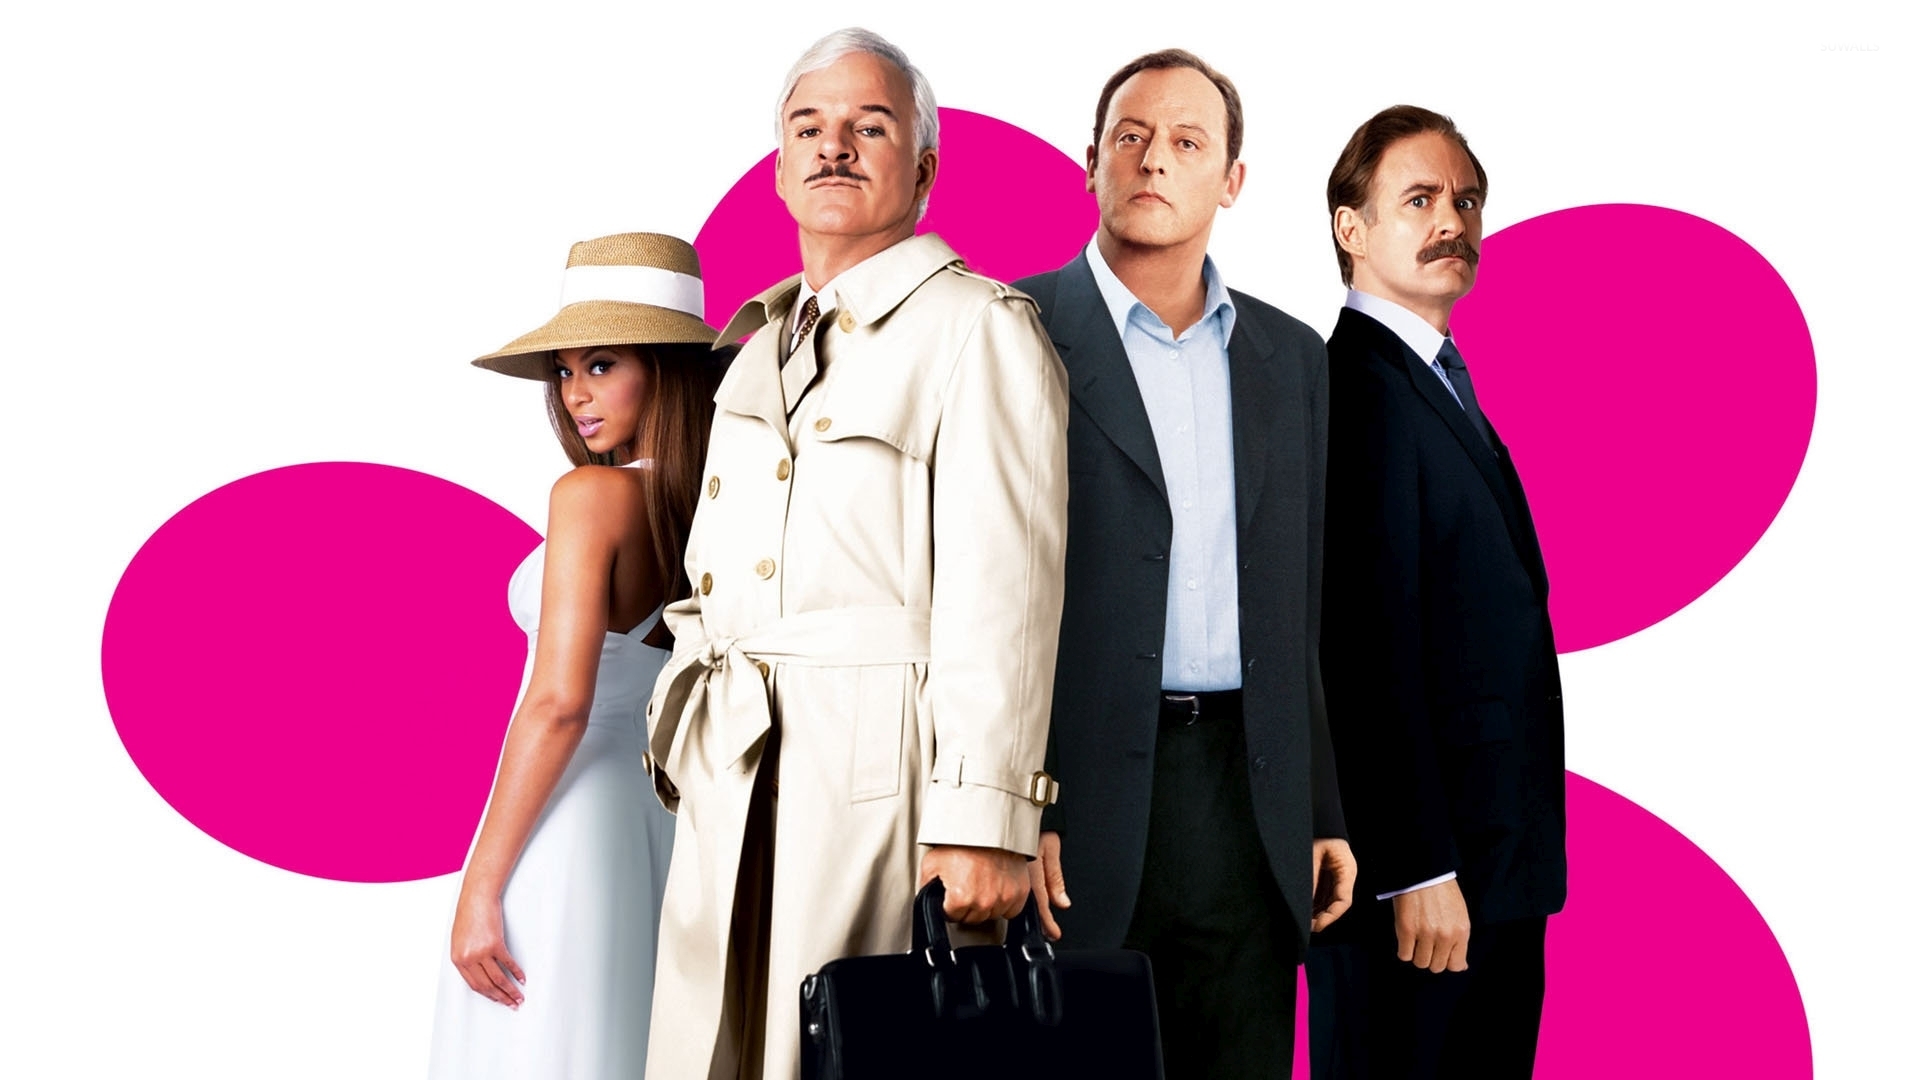 The Pink Panther main characters wallpaper - Movie wallpapers - #51213